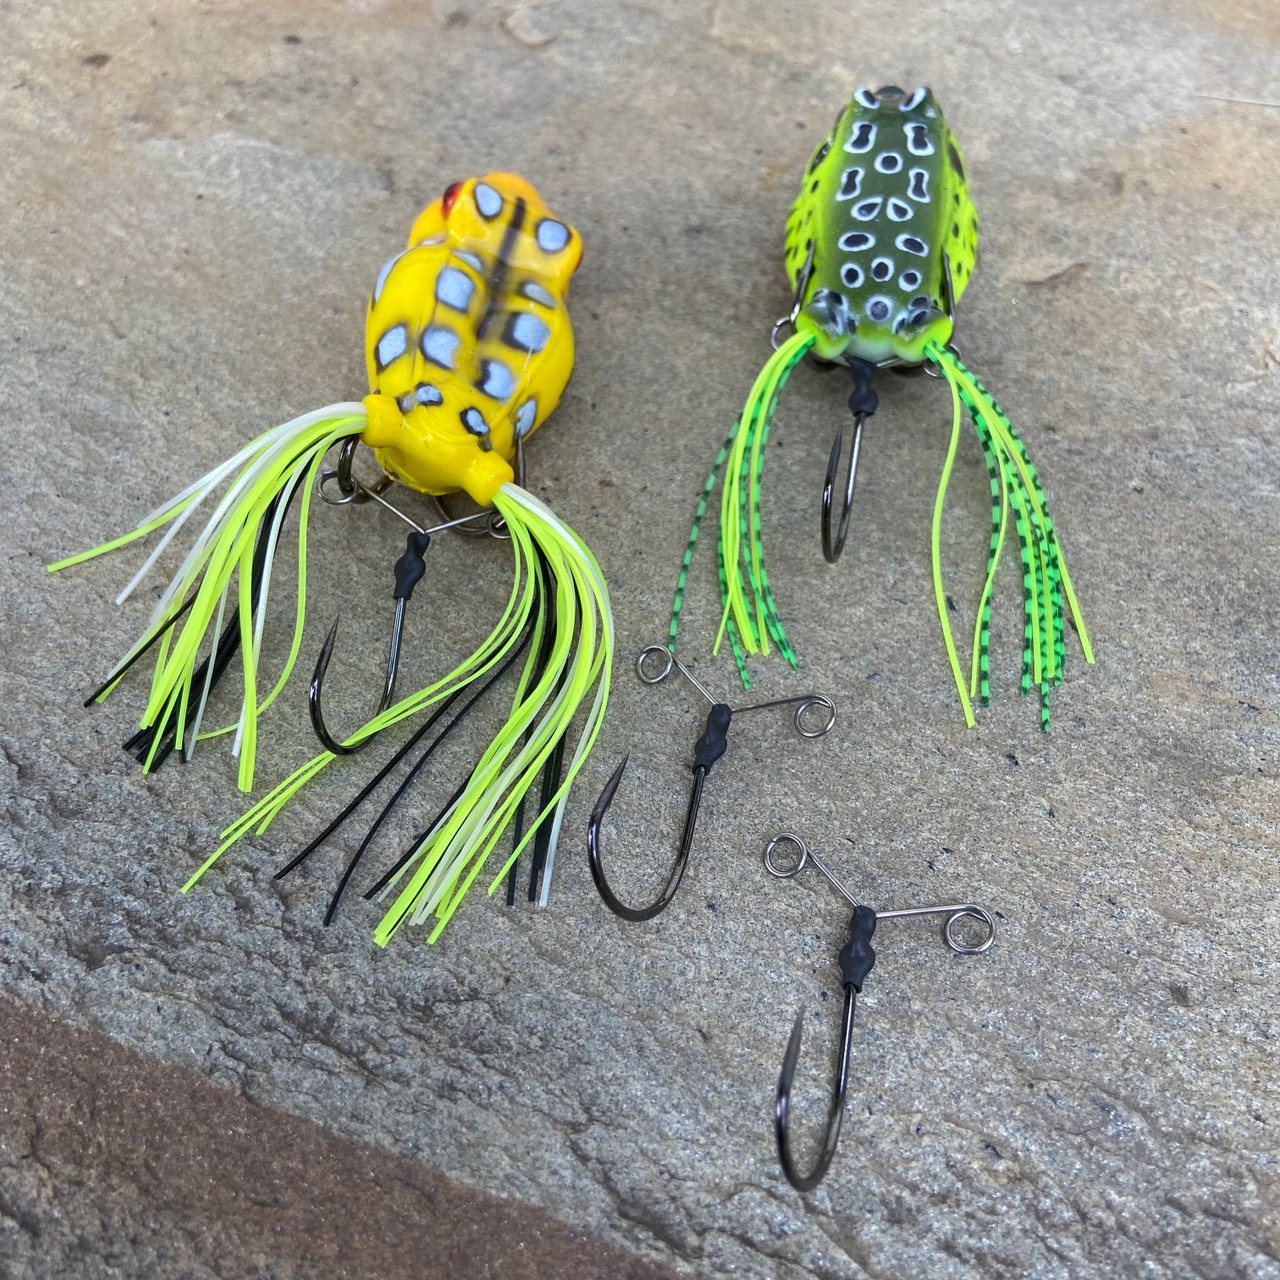 Lake Fork Frog Tail Hook - 2/0 - 5/0 Sports - Canada